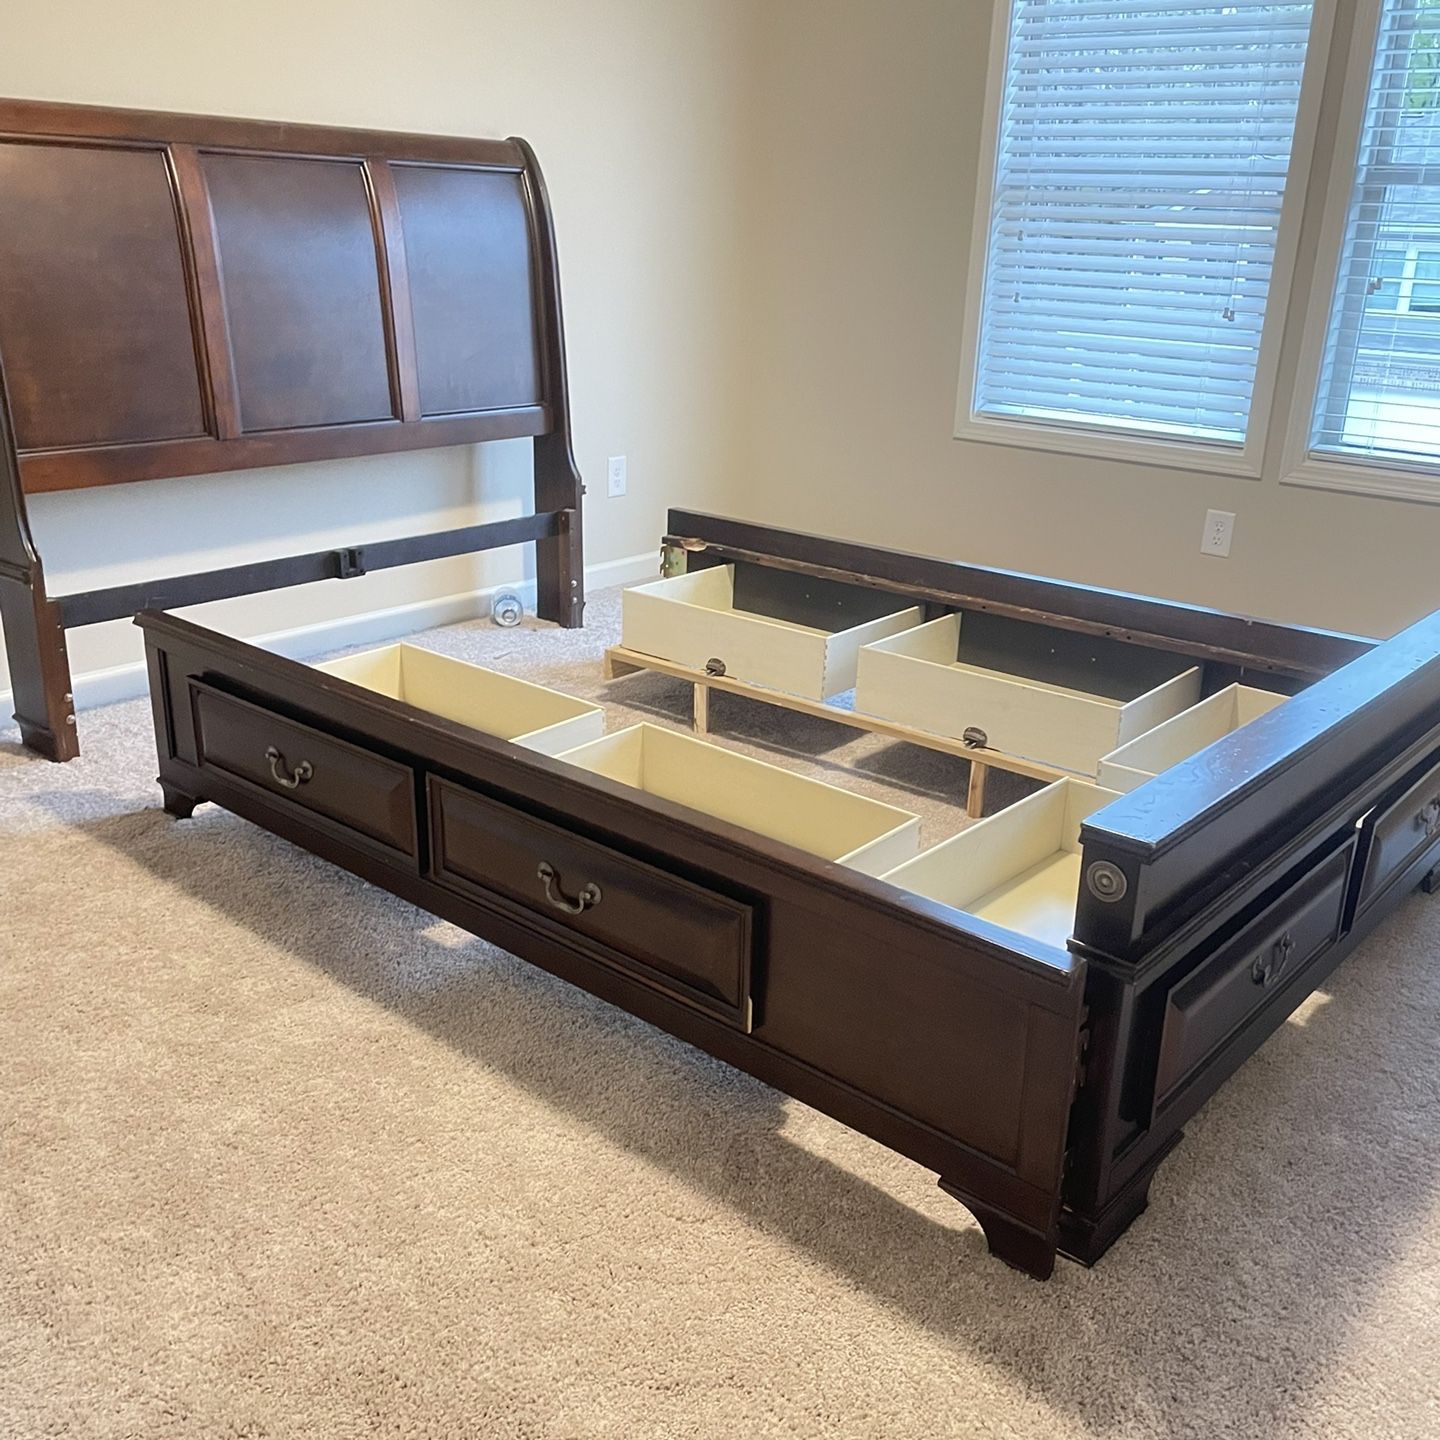 Queen size Sleigh bed, Cherry finish, storage bed & bed frame with wooden slats and bottom board